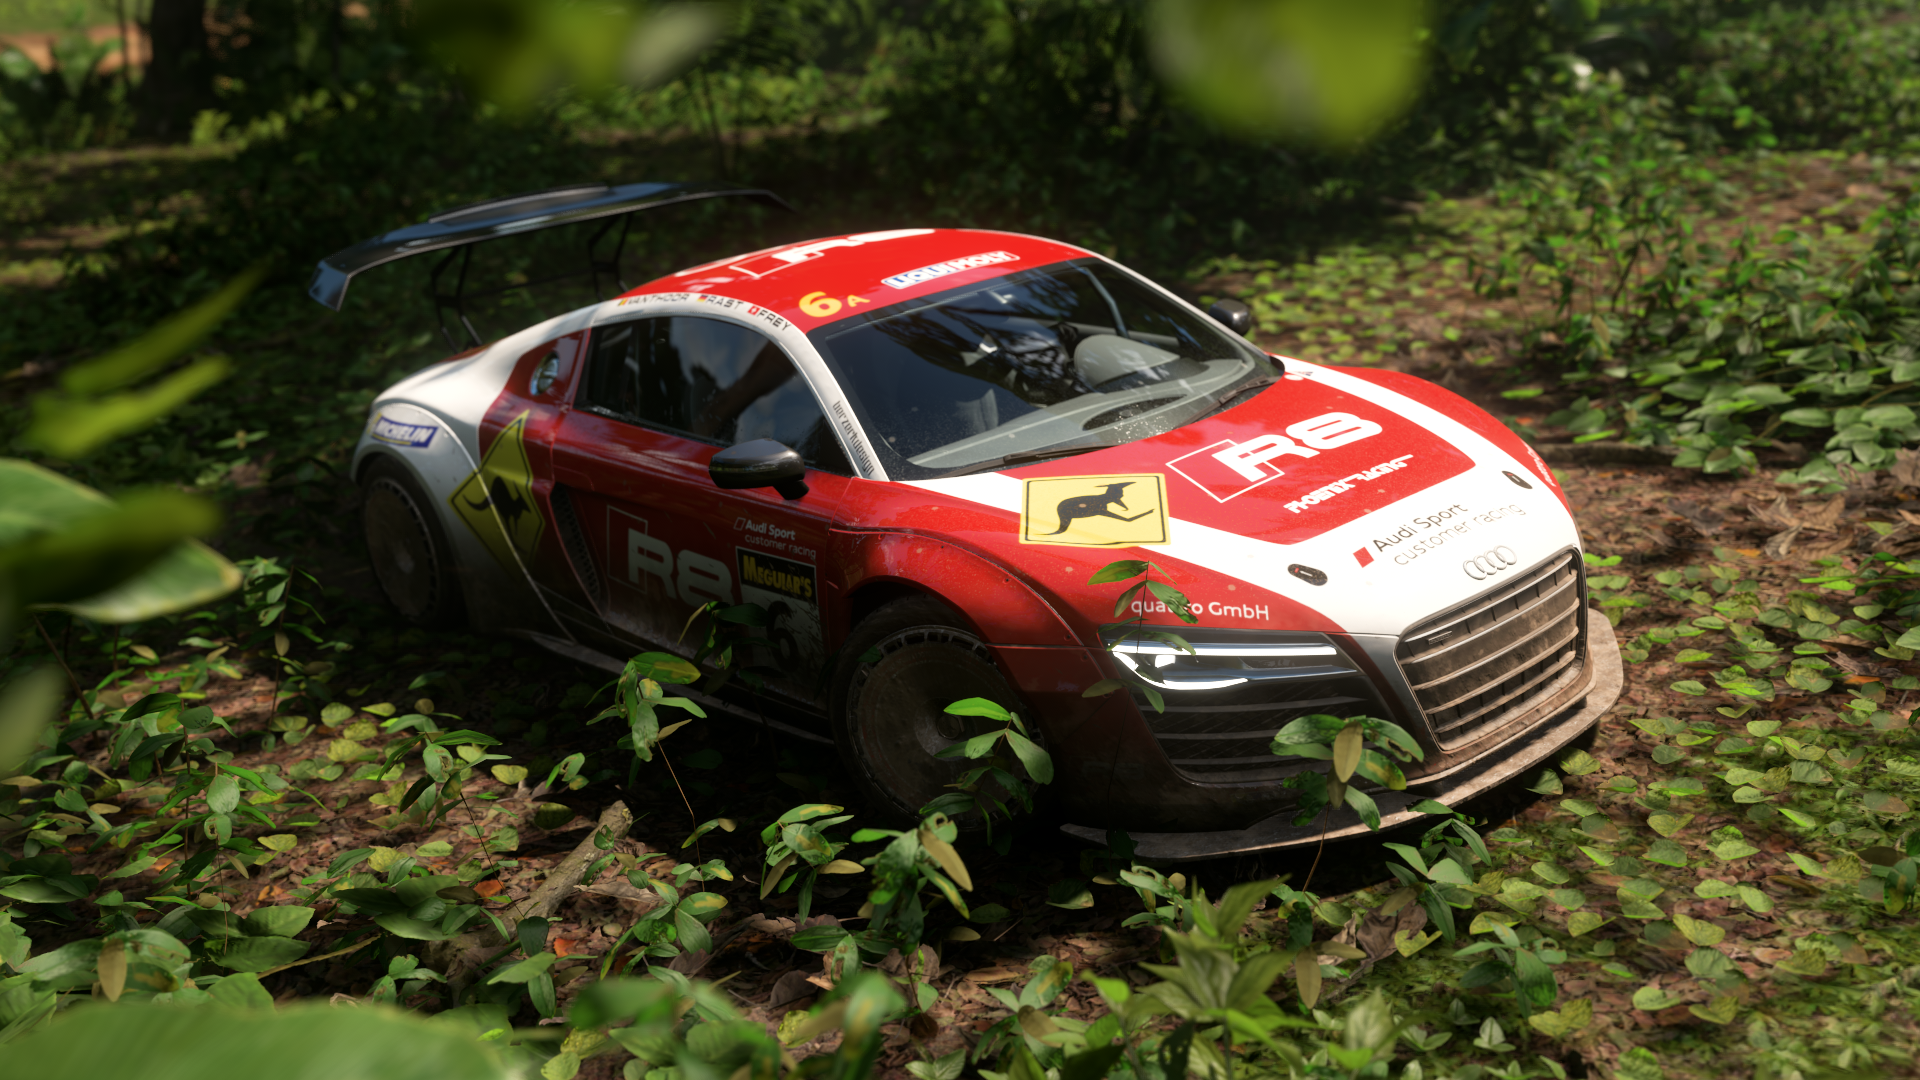 General 1920x1080 Audi R8 rally cars Forza Horizon 5 CGI video games grass car frontal view headlights livery German cars Volkswagen Group PlaygroundGames